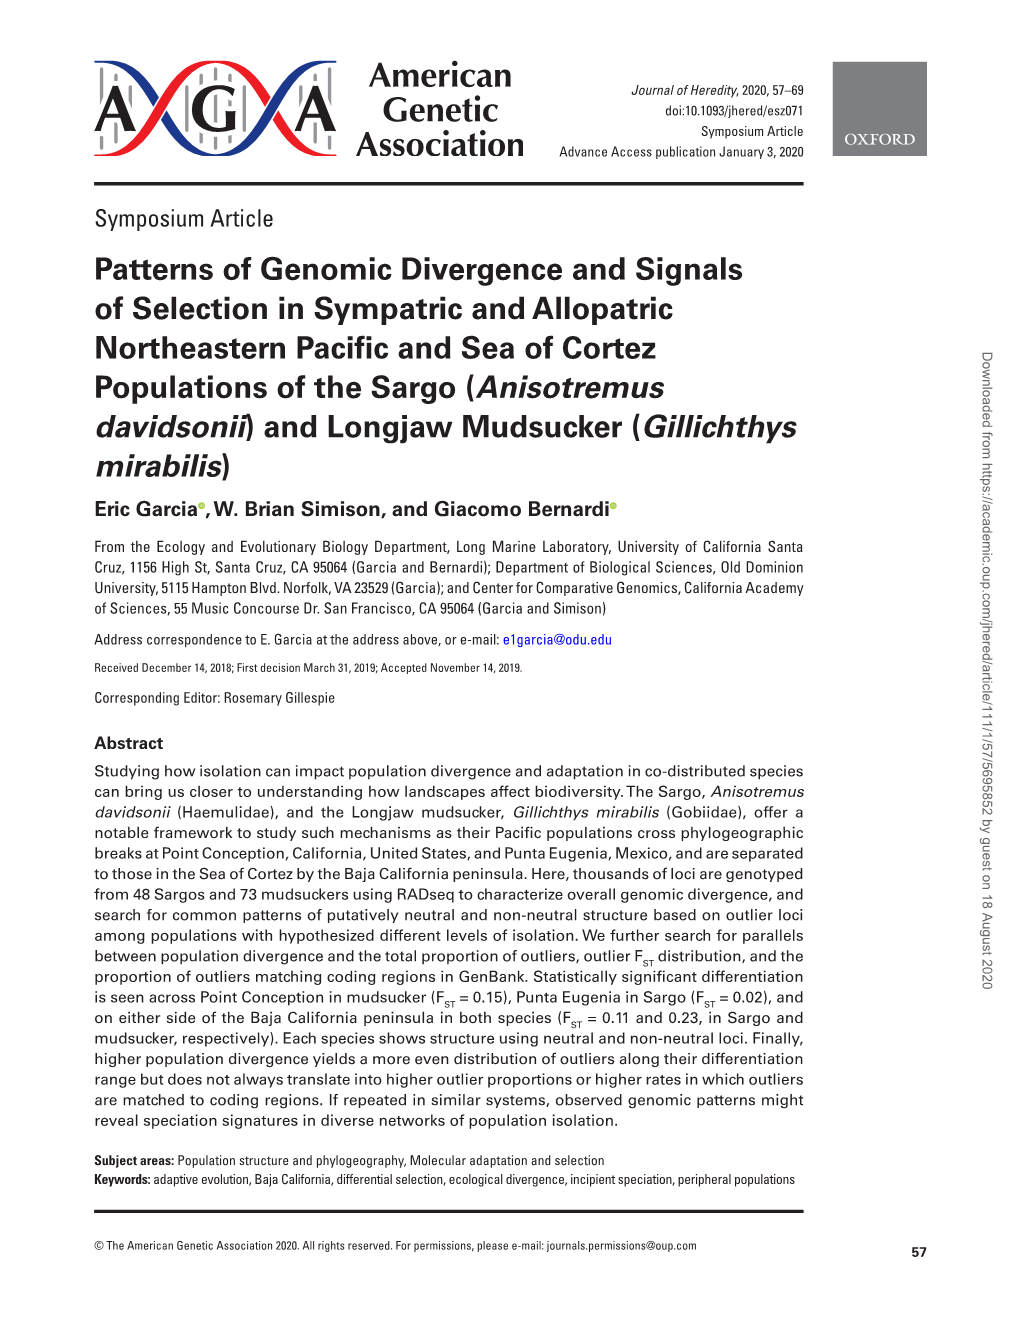 Patterns of Genomic Divergence and Signals of Selection in Sympatric and Allopatric